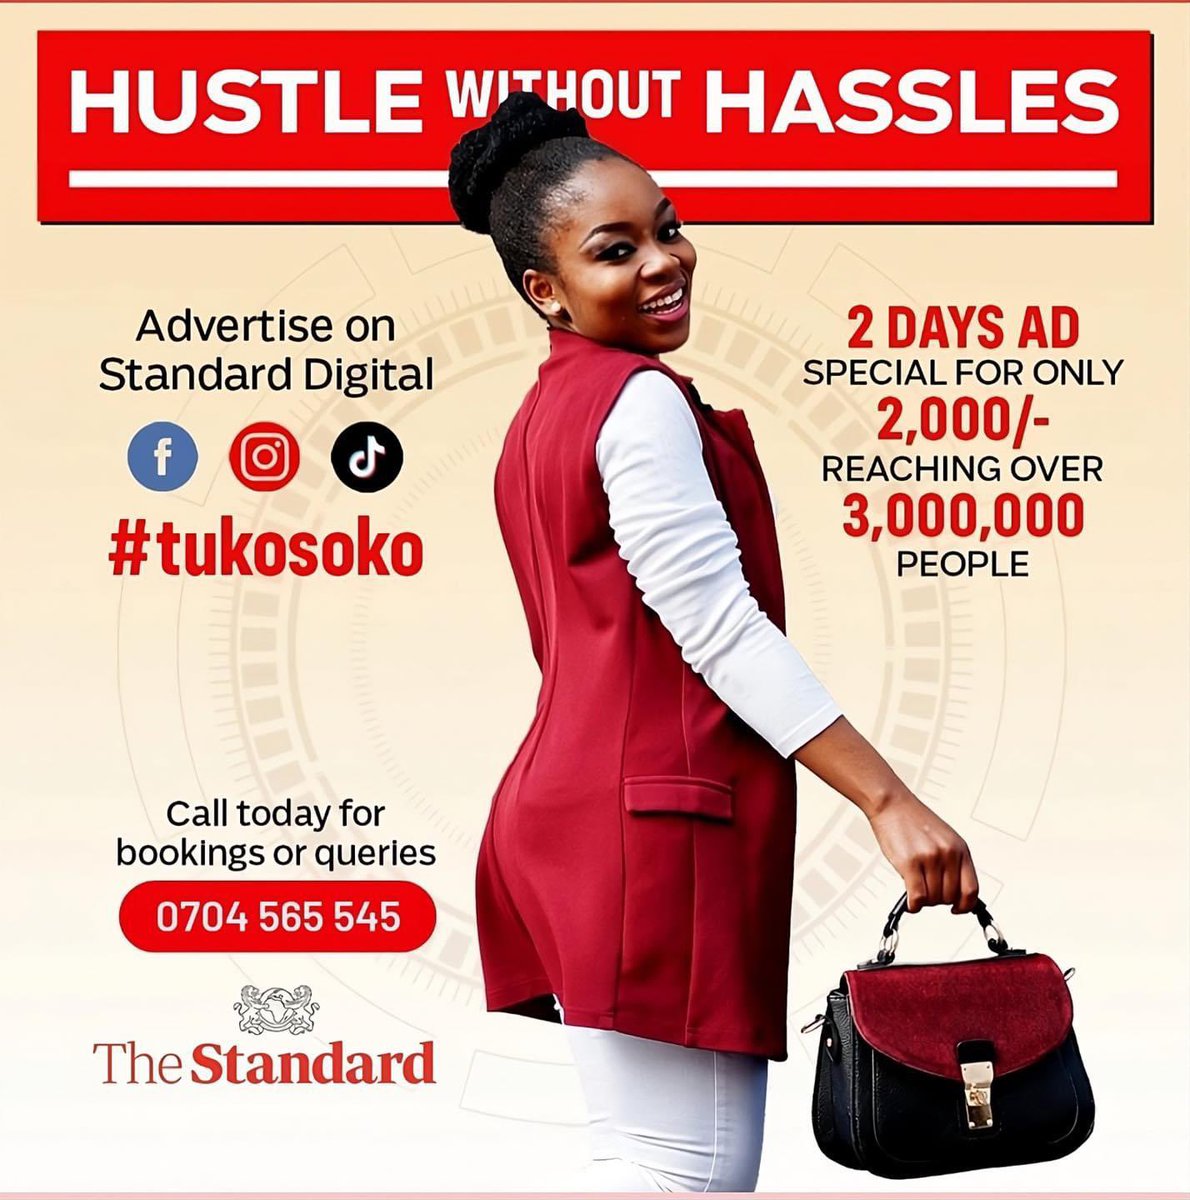 Don't let your small biz get lost in the crowd. Stand out with Standard Digital's social media expertise! Call 0704565545 to secure your spot. #TUKOSOKO